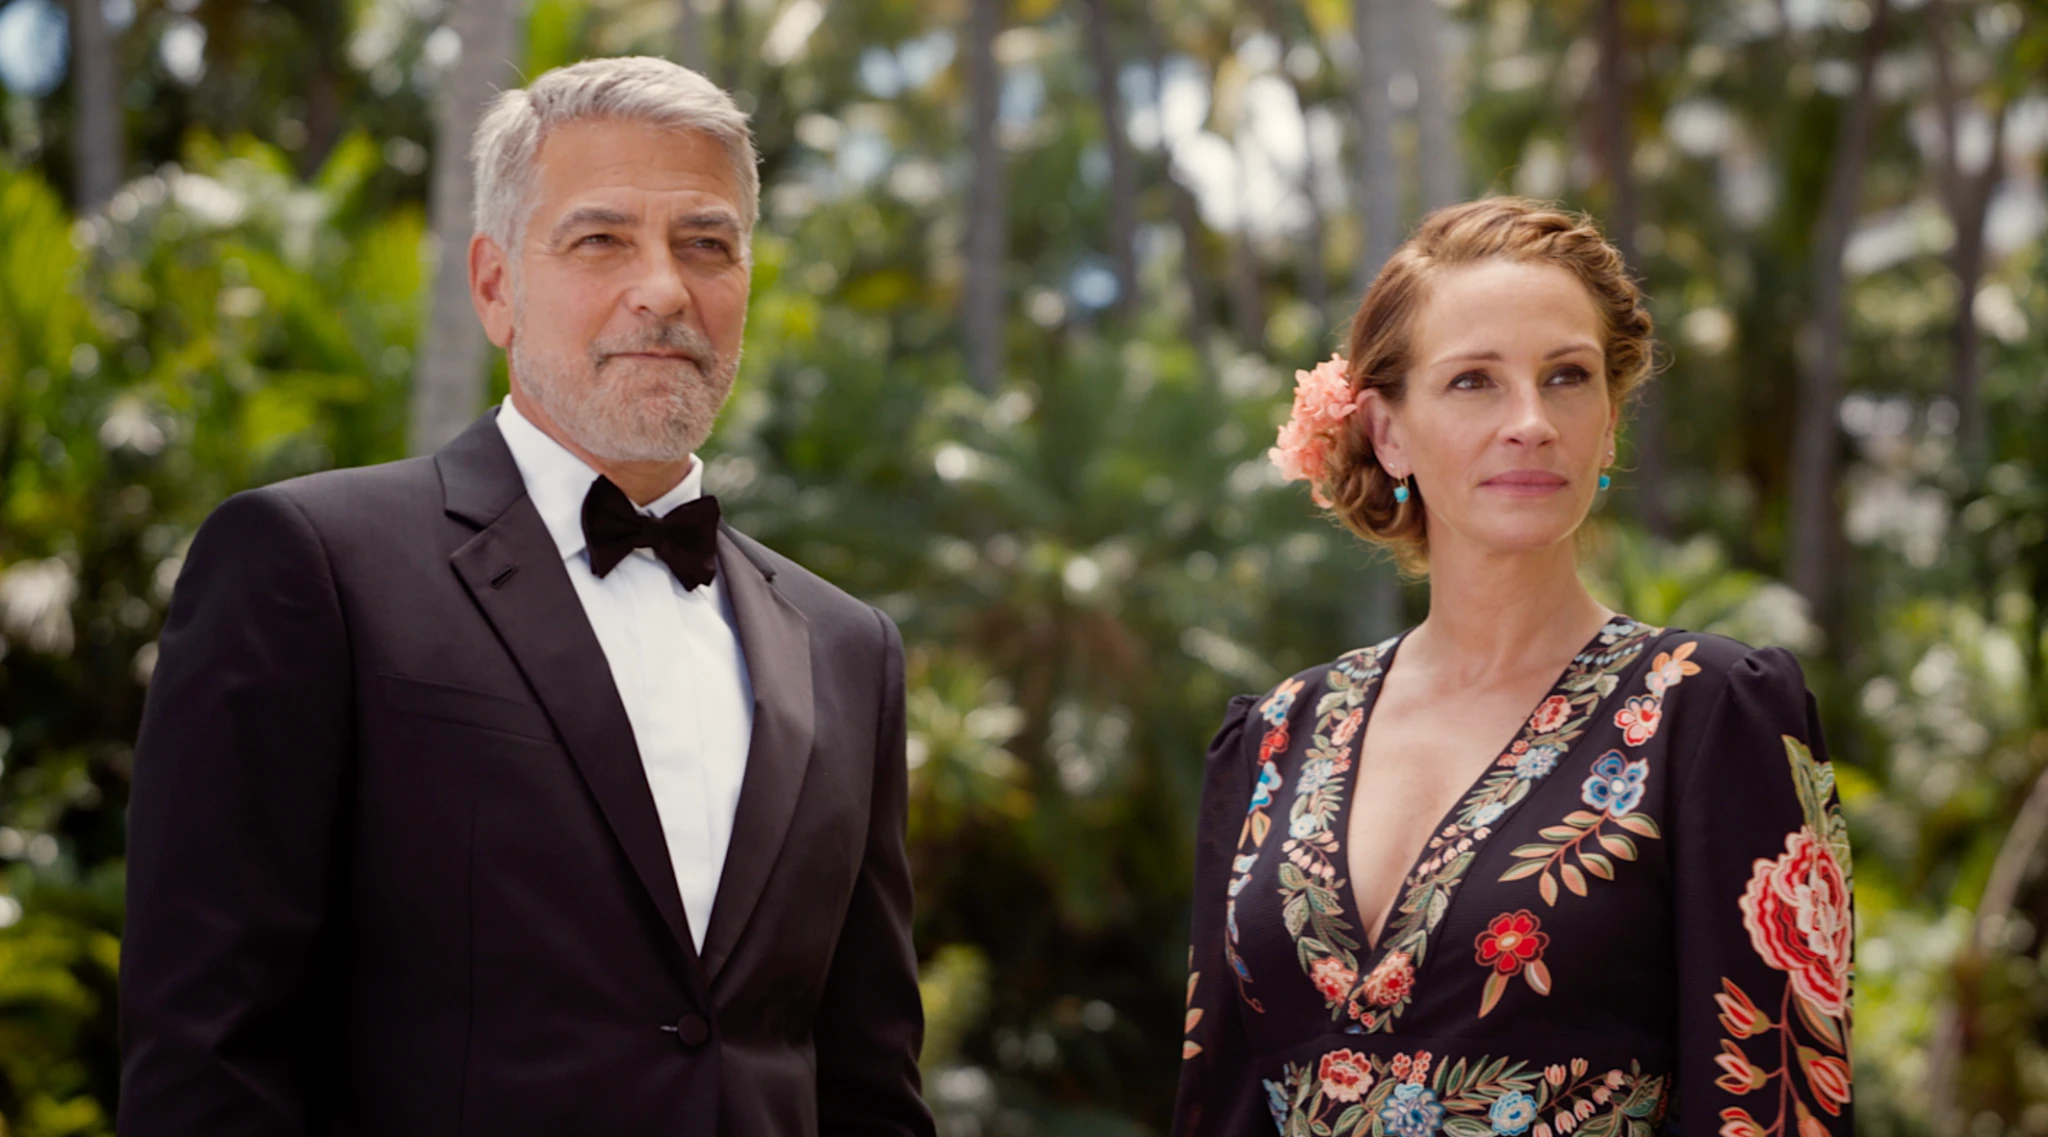 'Ticket to Paradise' Trailer Reunites Julia Roberts and George Clooney for a New Rom-Com